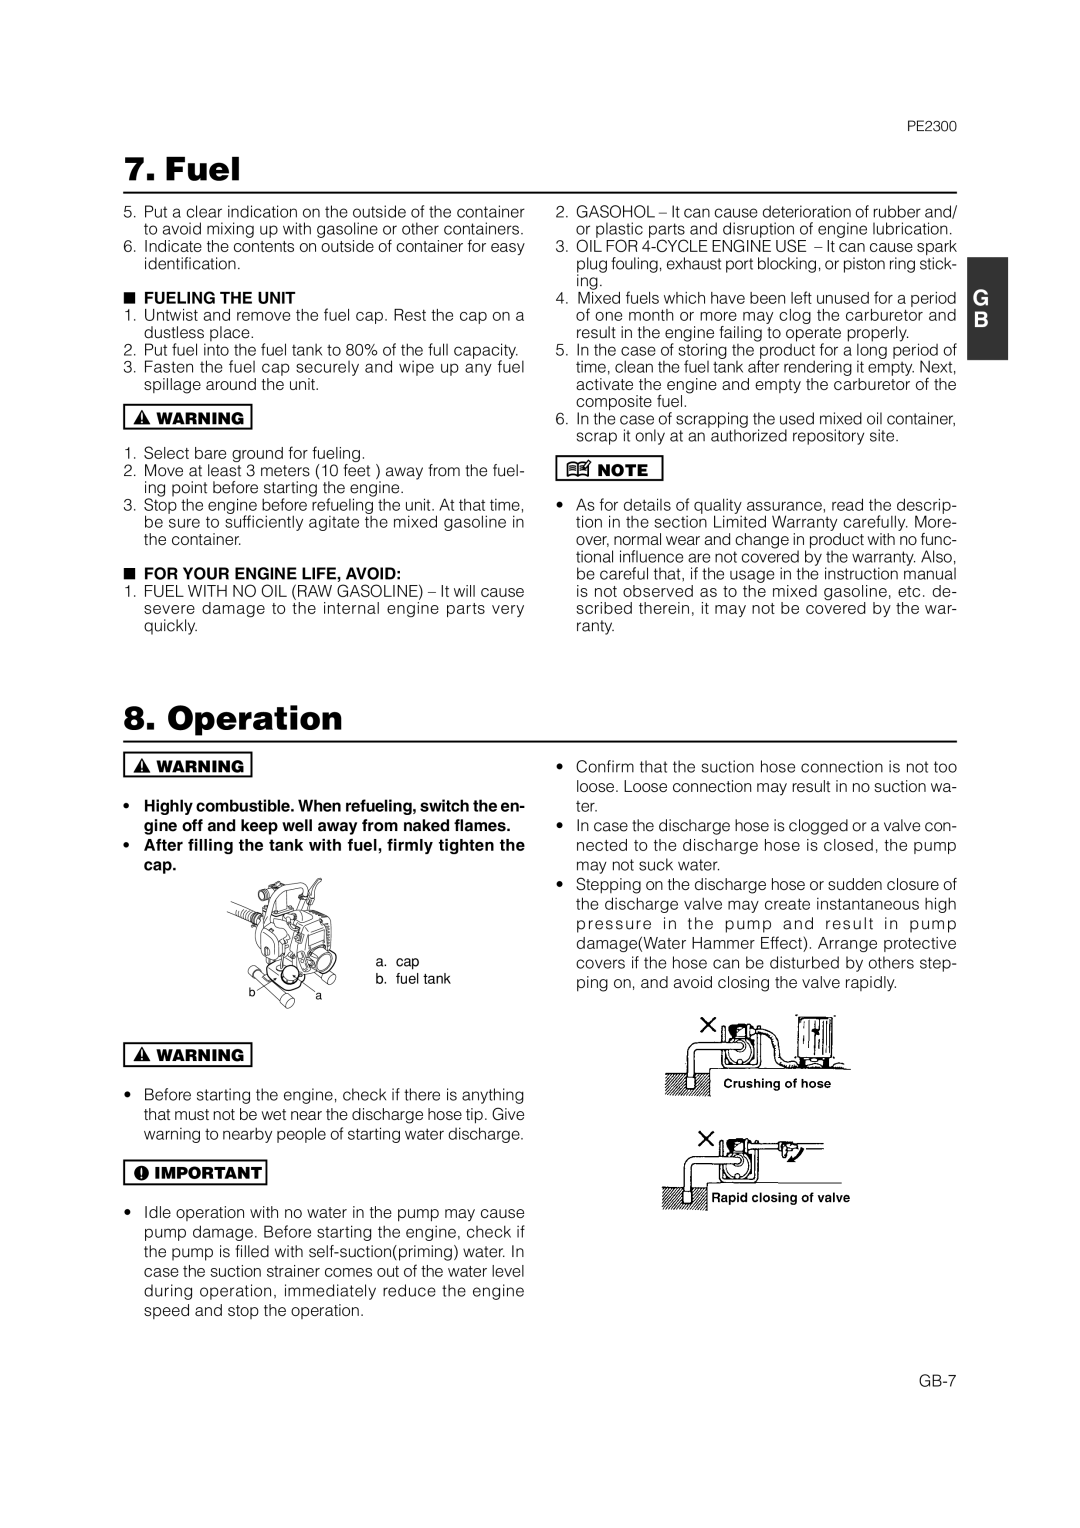 Zenoah PE2300 owner manual Operation, Fueling The Unit, For Your Engine Life, Avoid 